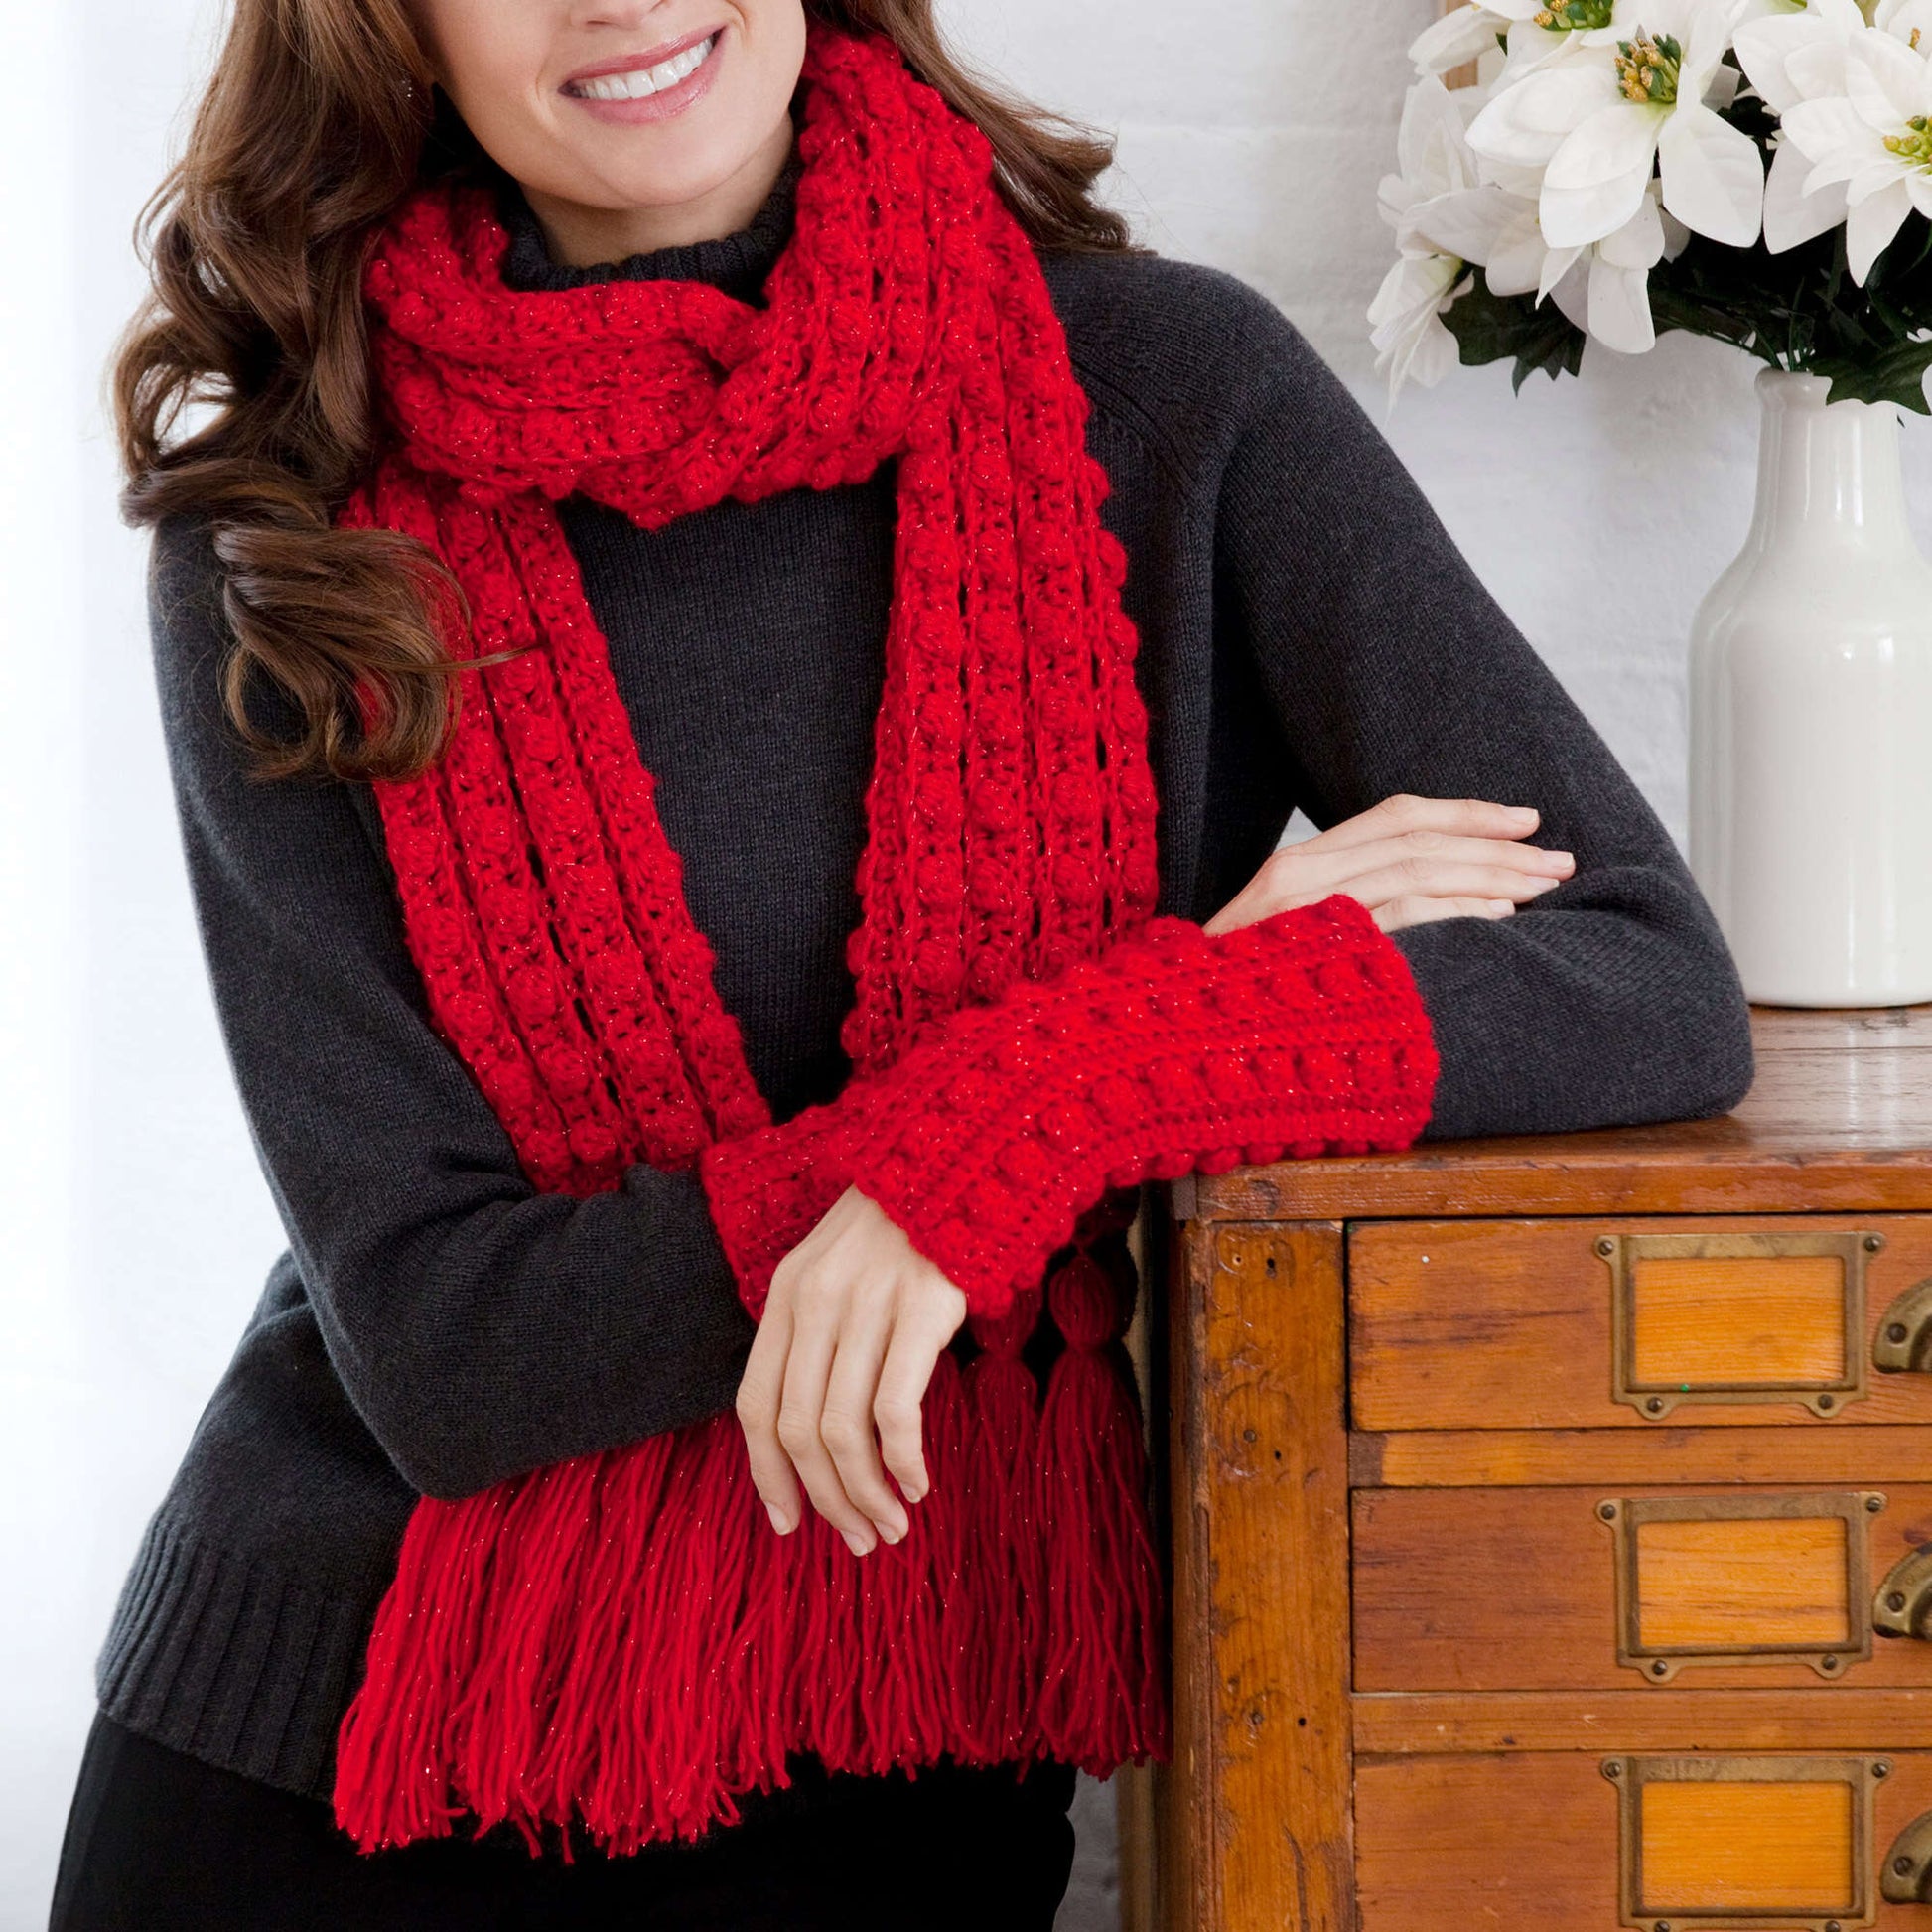 Free Red Heart Crochet Lacy Bobble Scarf And Wristlets Pattern